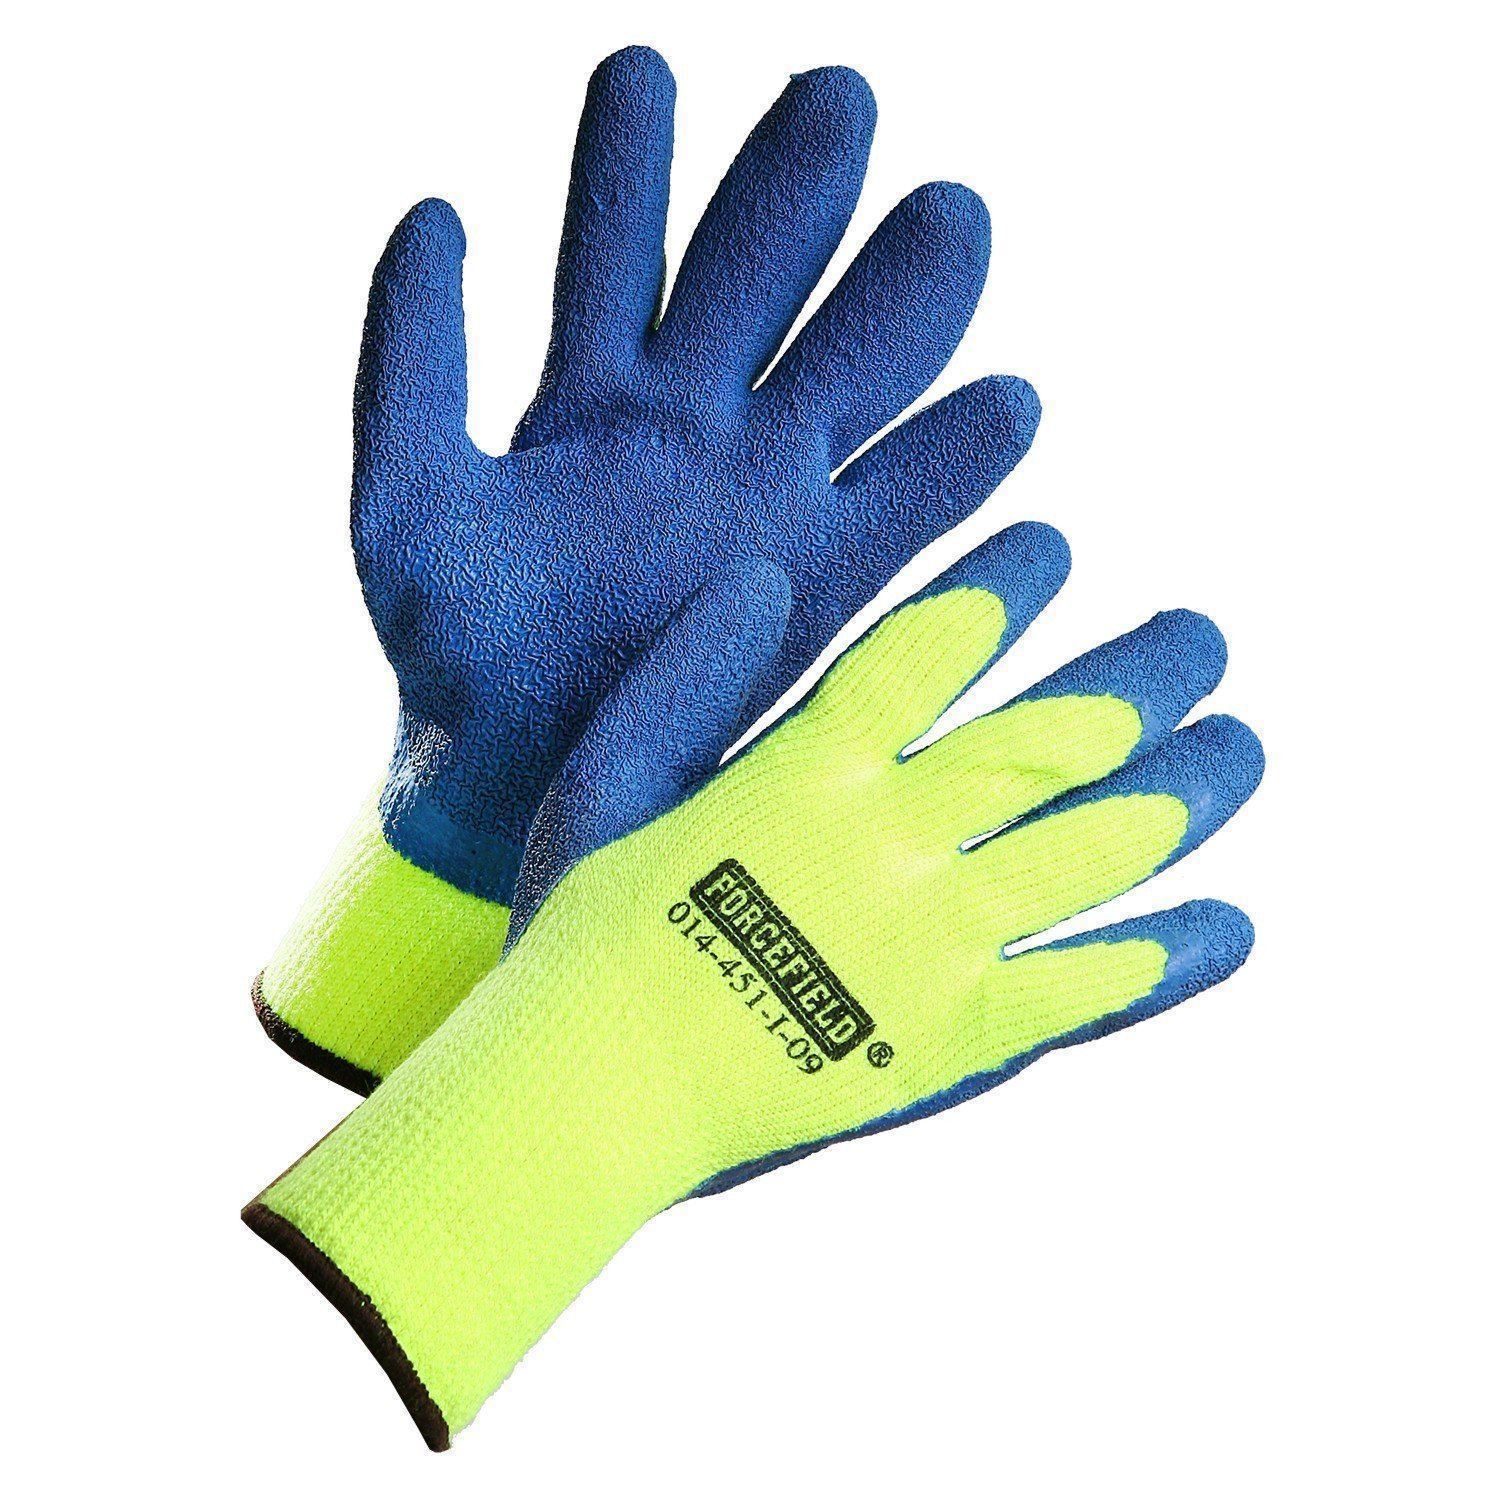 Hi-Vis Winter Insulated Work Gloves, Palm Coated with Blue Crinkle Latex - Hi Vis Safety